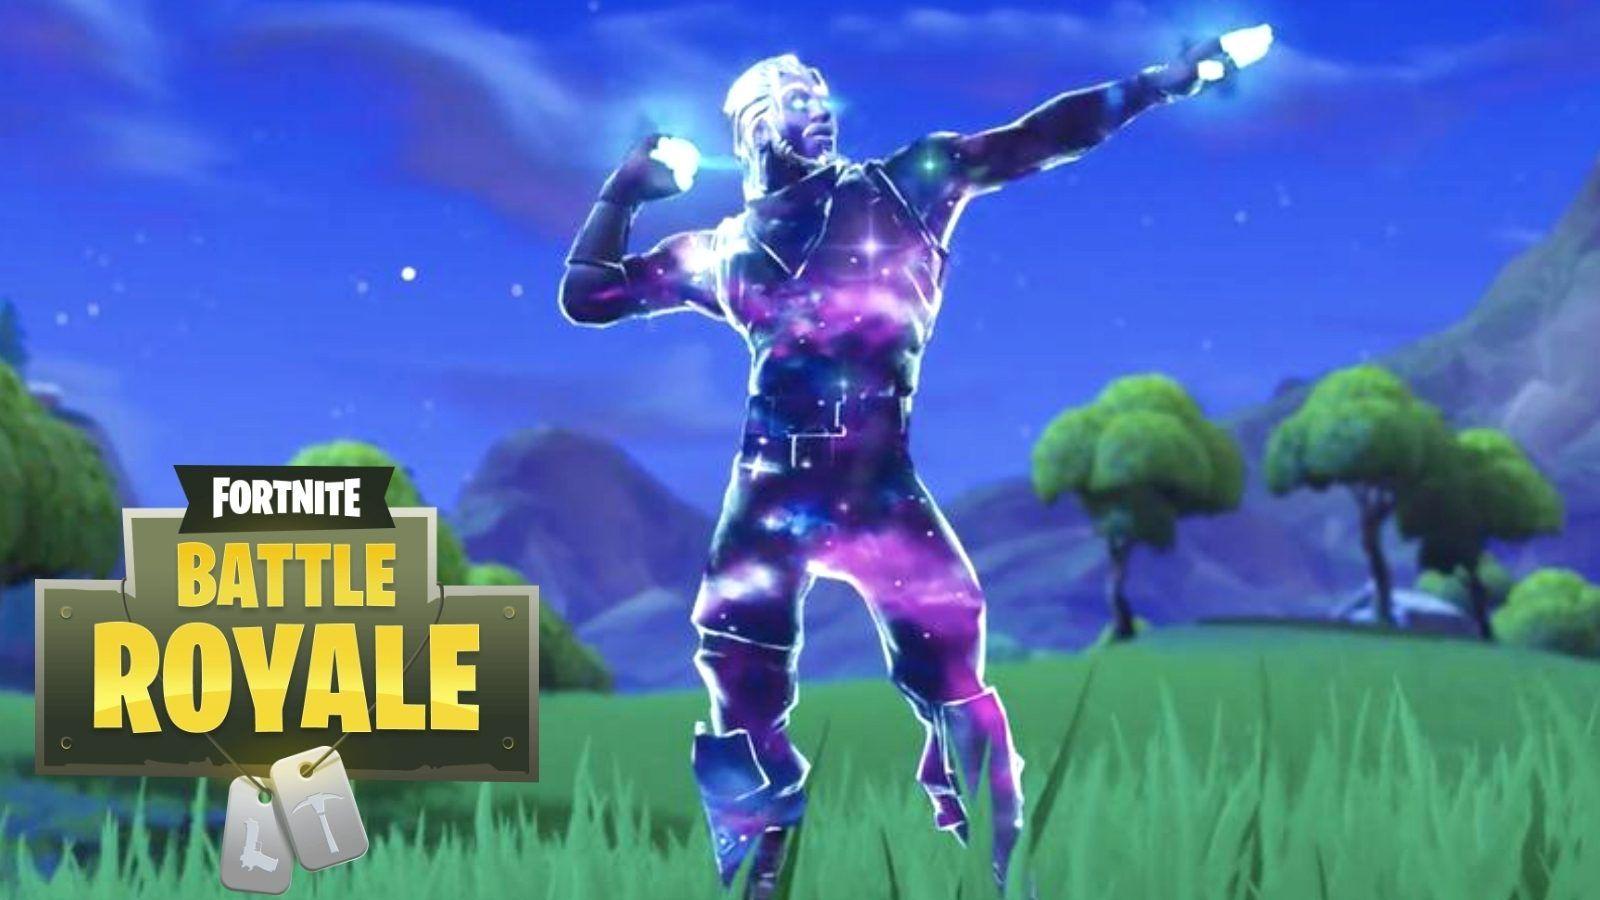 UPDATED Galaxy Fortnite Skin is Set for Worldwide Release Be